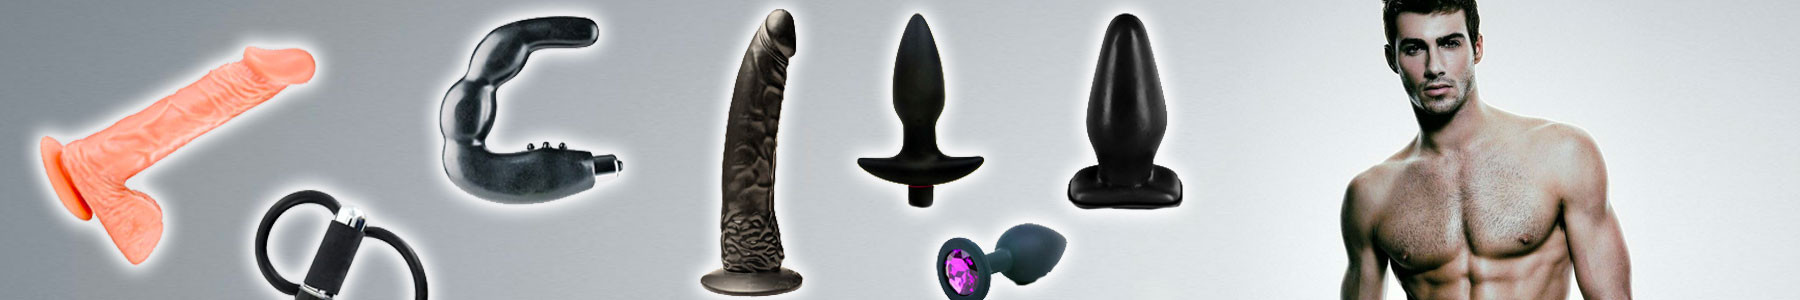 Shop of Male Dildos at Discount Prices